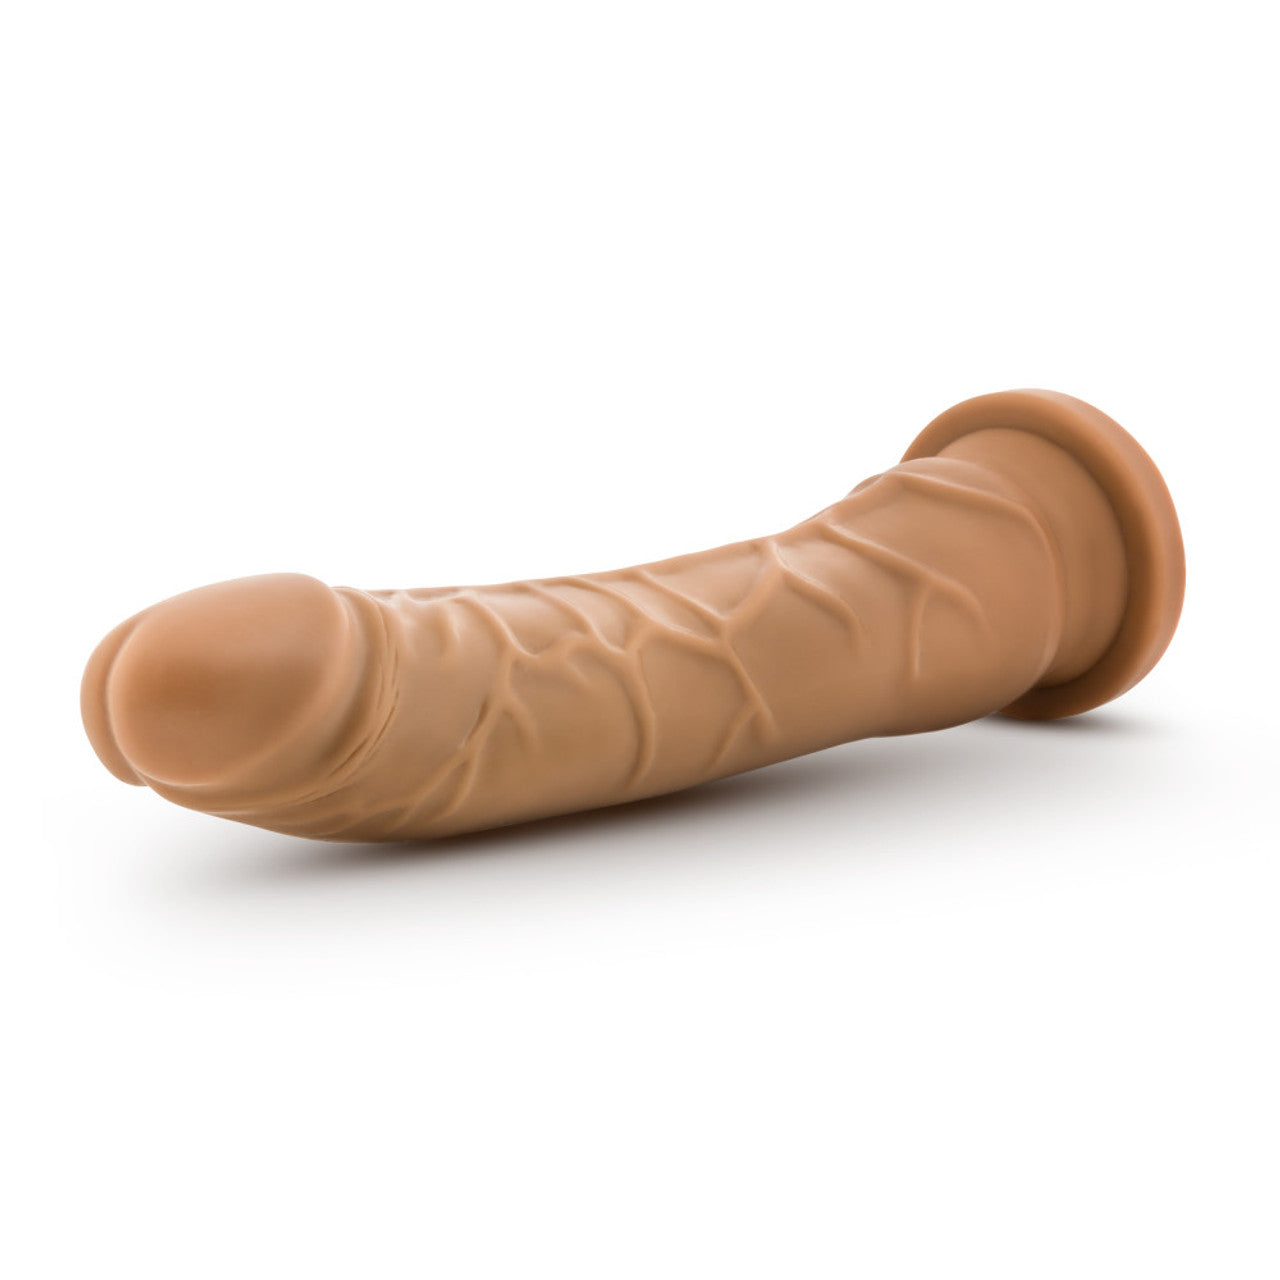 8 Inch Dong with Suction Cup - Mocha - Thorn & Feather